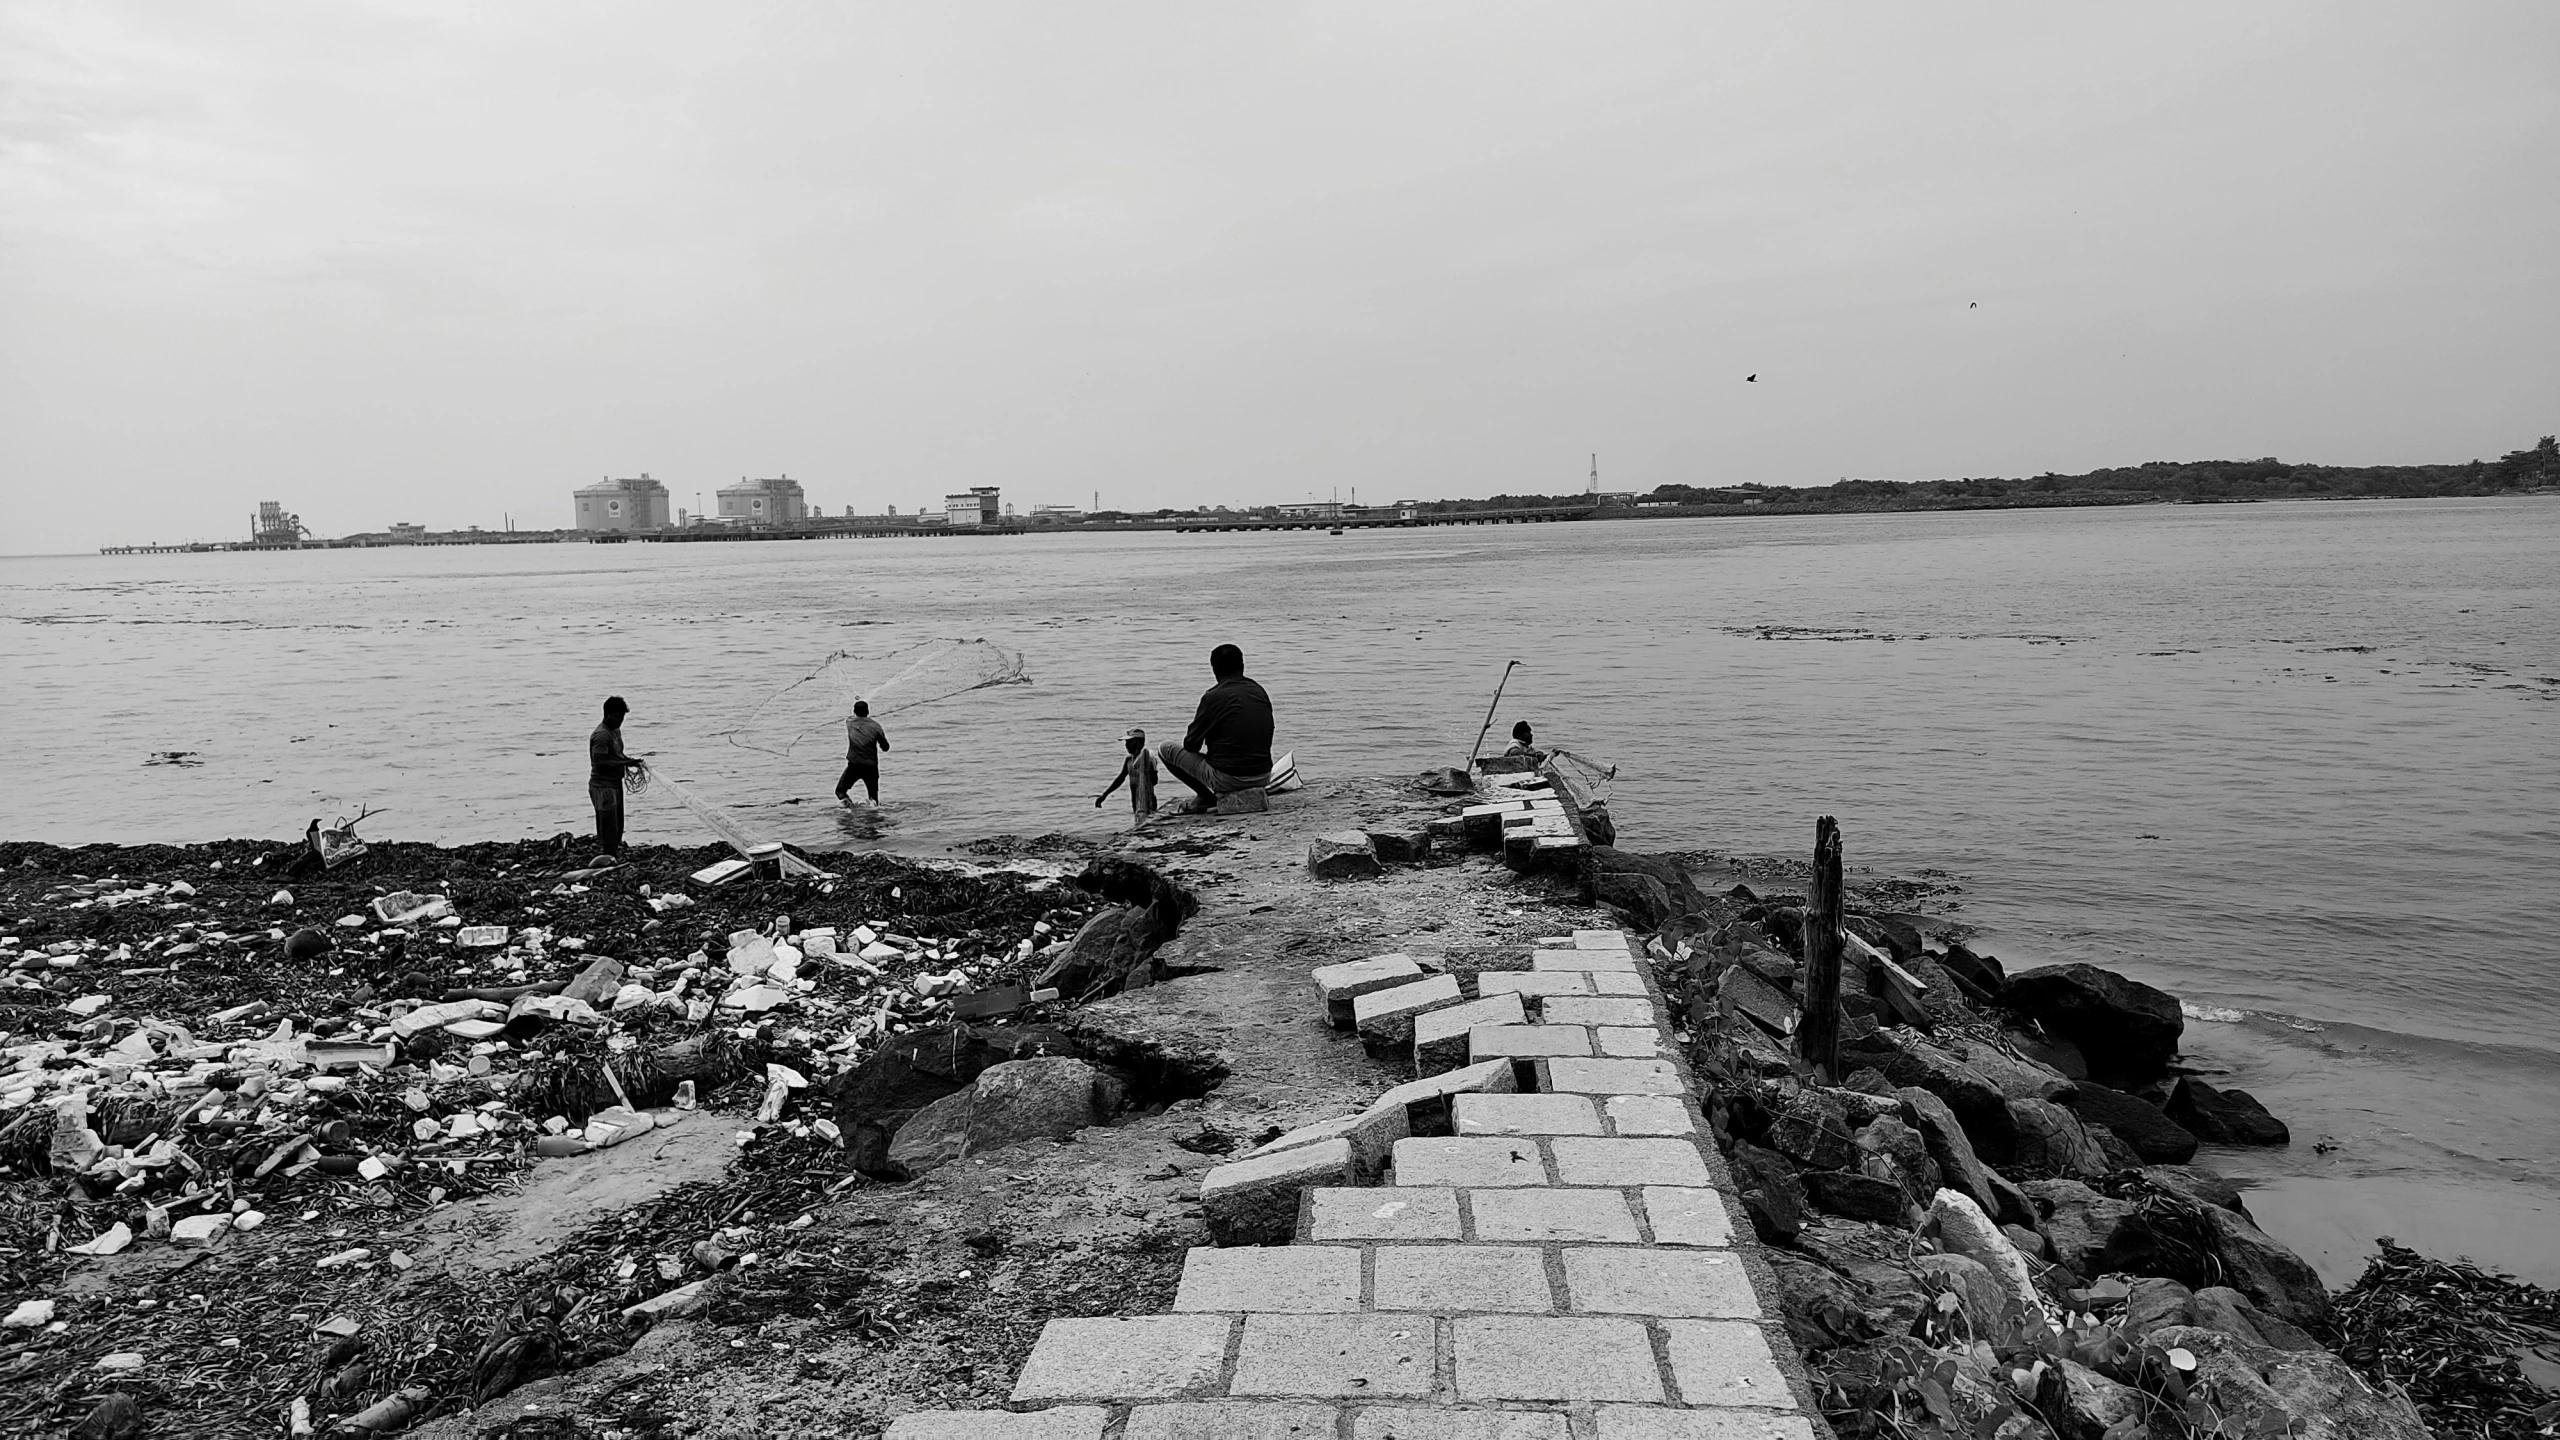 a black and white image shows children on shore next to the ocean